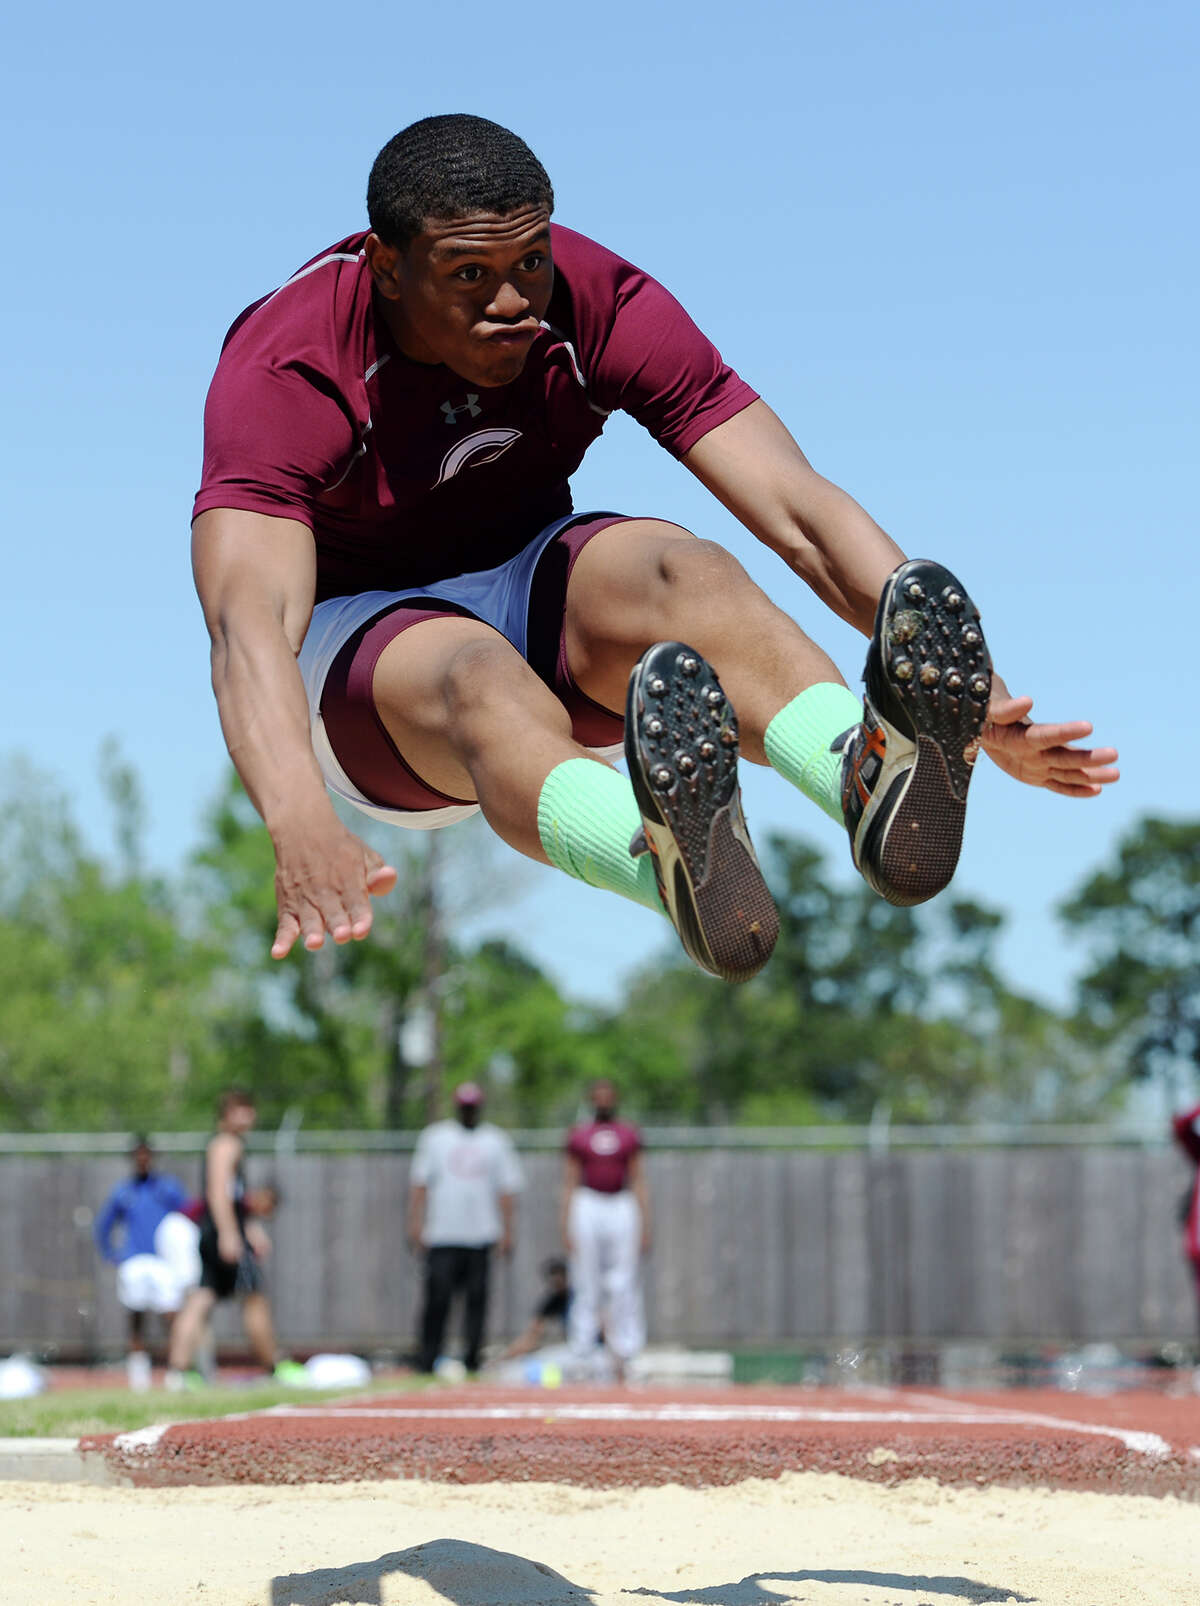 Central's Devwah Whaley preps for his landing while competing in the long jump event at Monday's meet. The District 20-4A track meet was held at Babe Zaharias Park on Monday. Photo taken Monday, 4/7/14 Jake Daniels/@JakeD_in_SETX